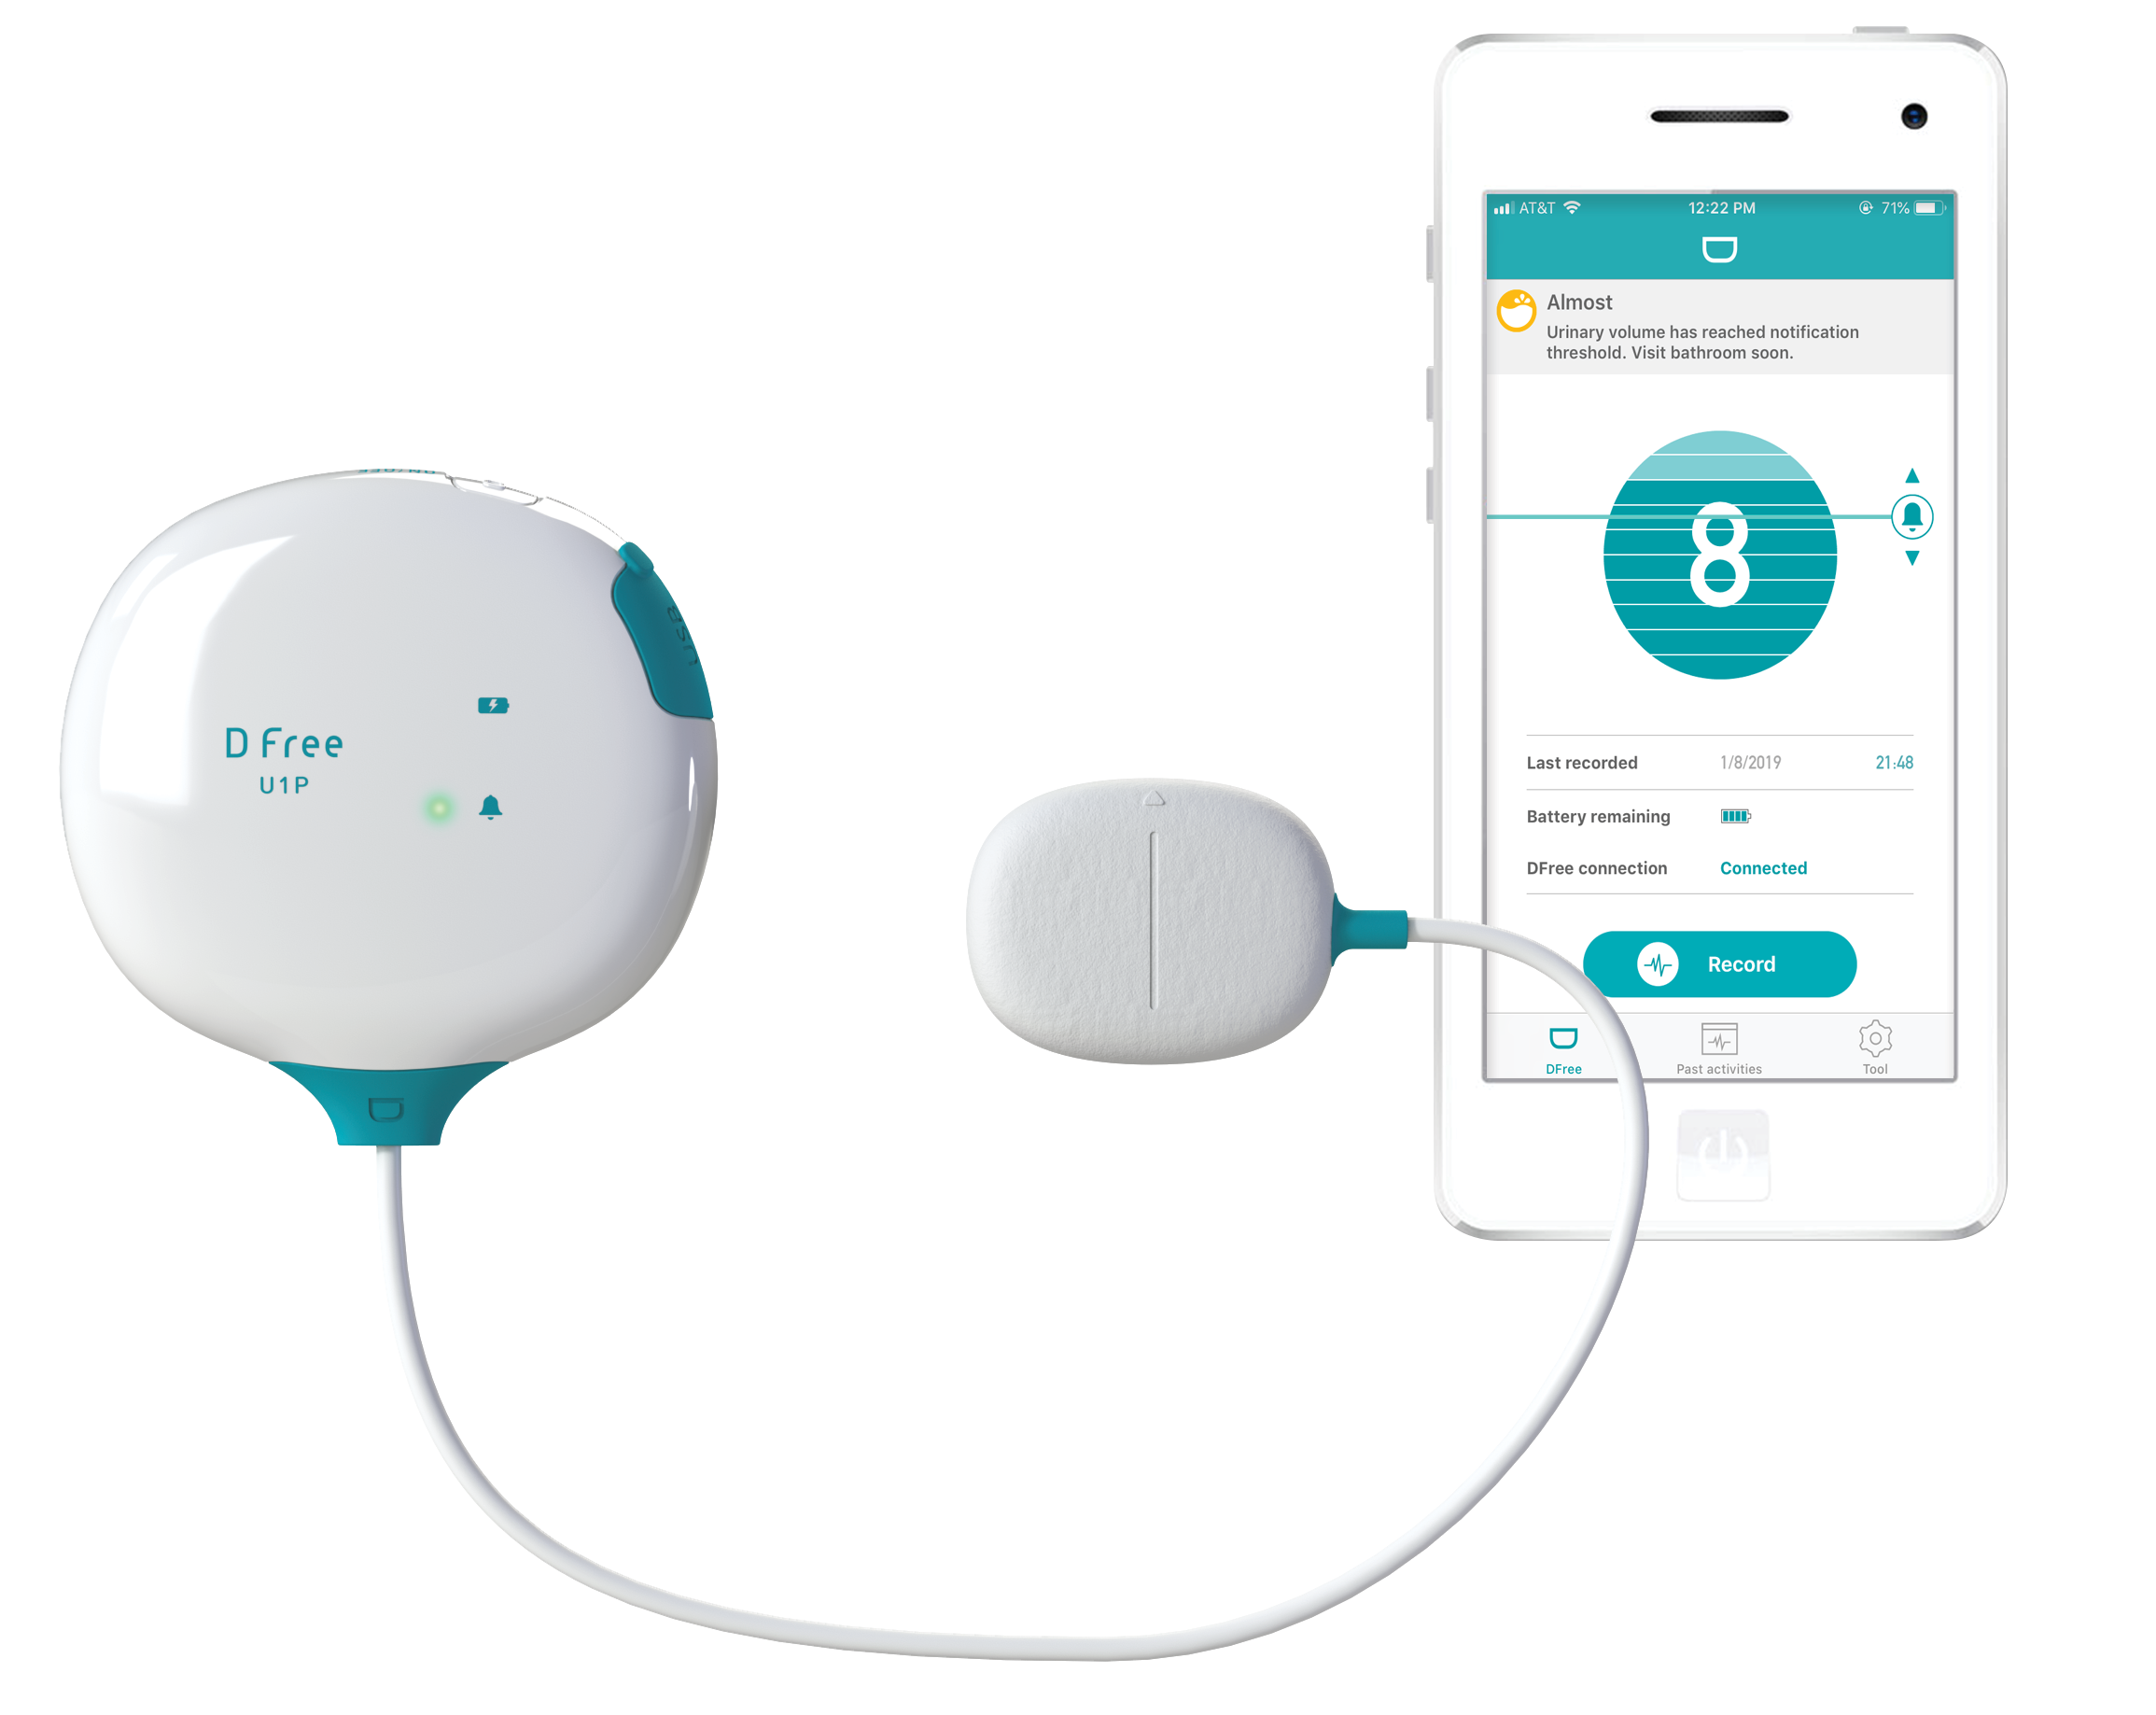 DFree wearable device connects via Bluetooth® to a smartphone or tablet and sends notifications via the DFree app -- informing the individual or caregiver, when it’s time to go to the bathroom.